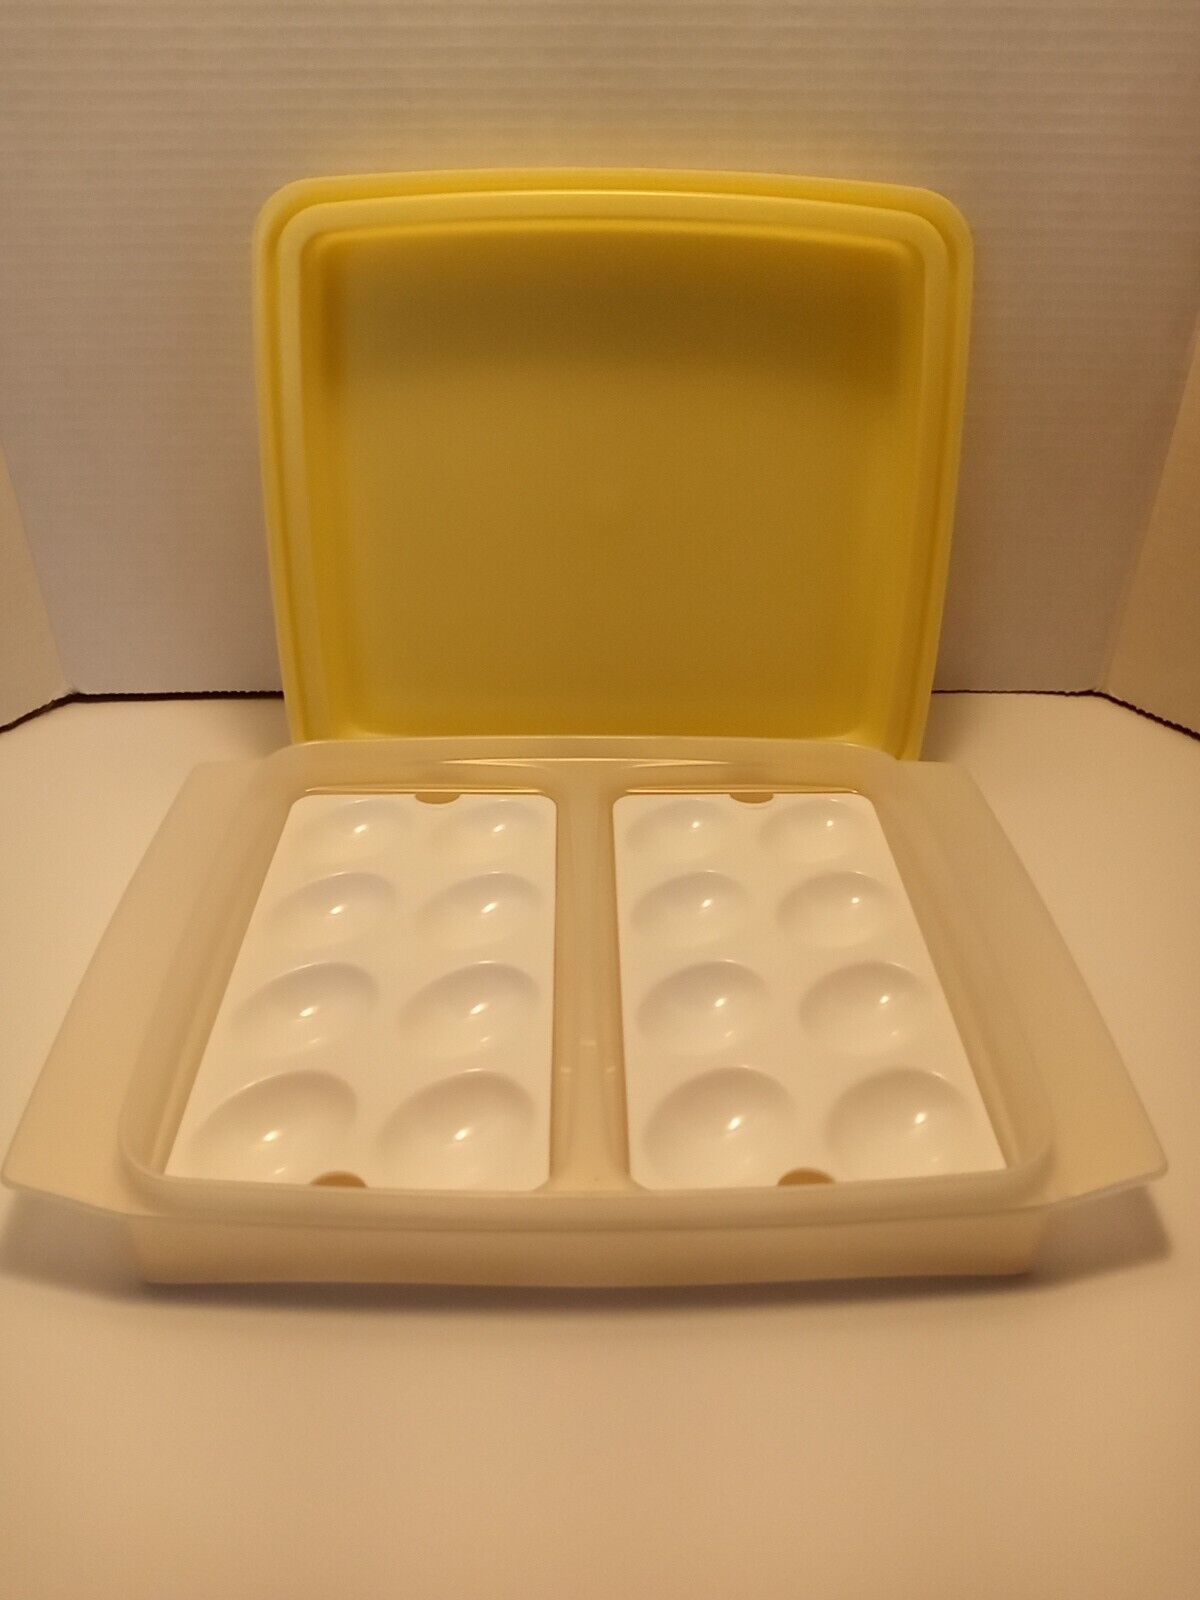 Vintage Tupperware Deviled Egg Keeper Carrier Yellow 4-Piece Set  Excellent Con